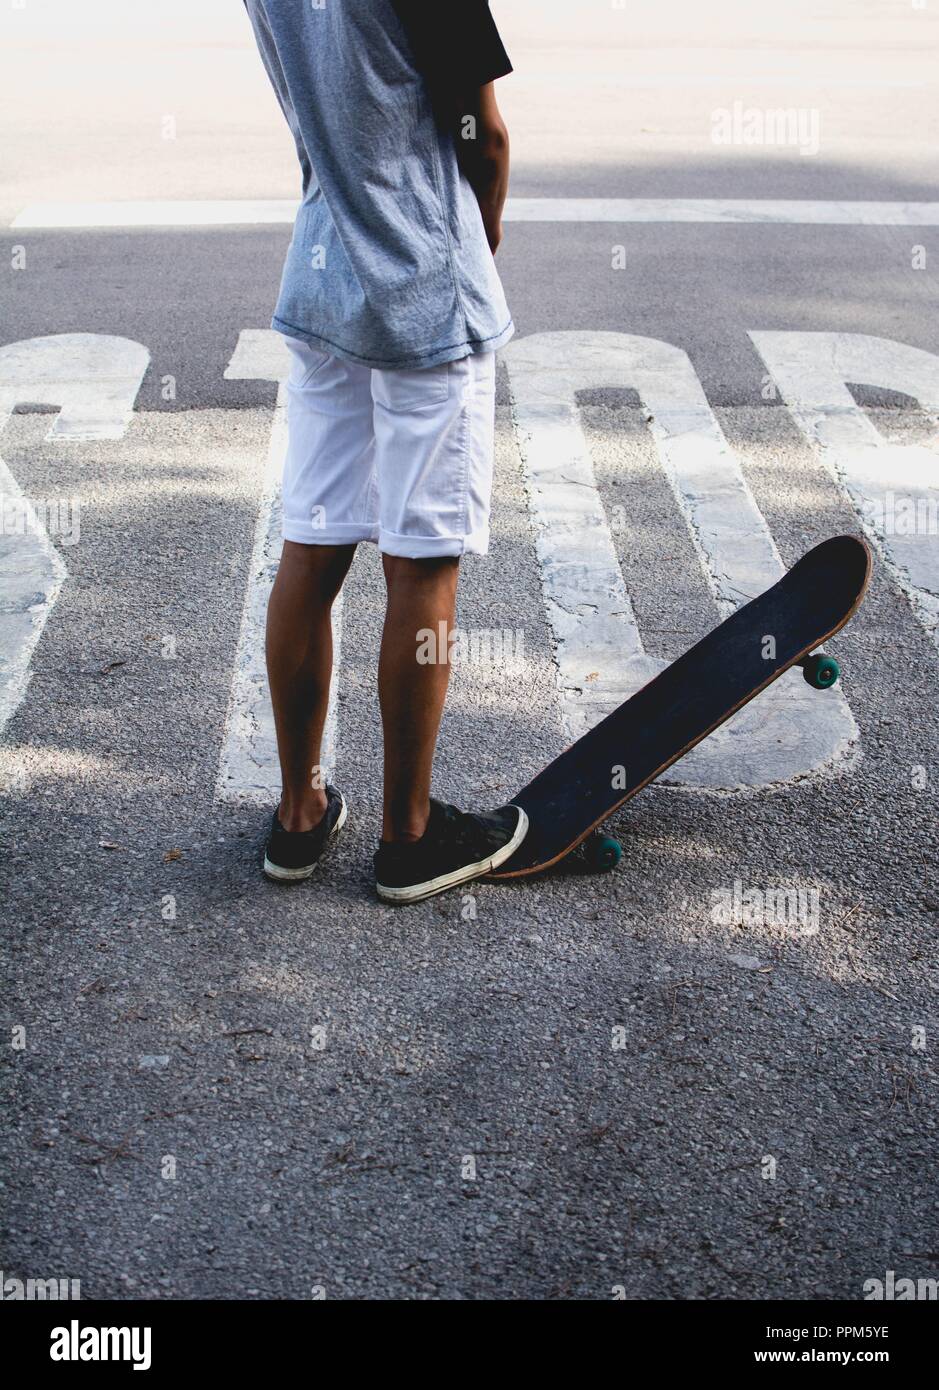 The boy with his skateboard staying on stop sign painted on asphalt road Stock Photo